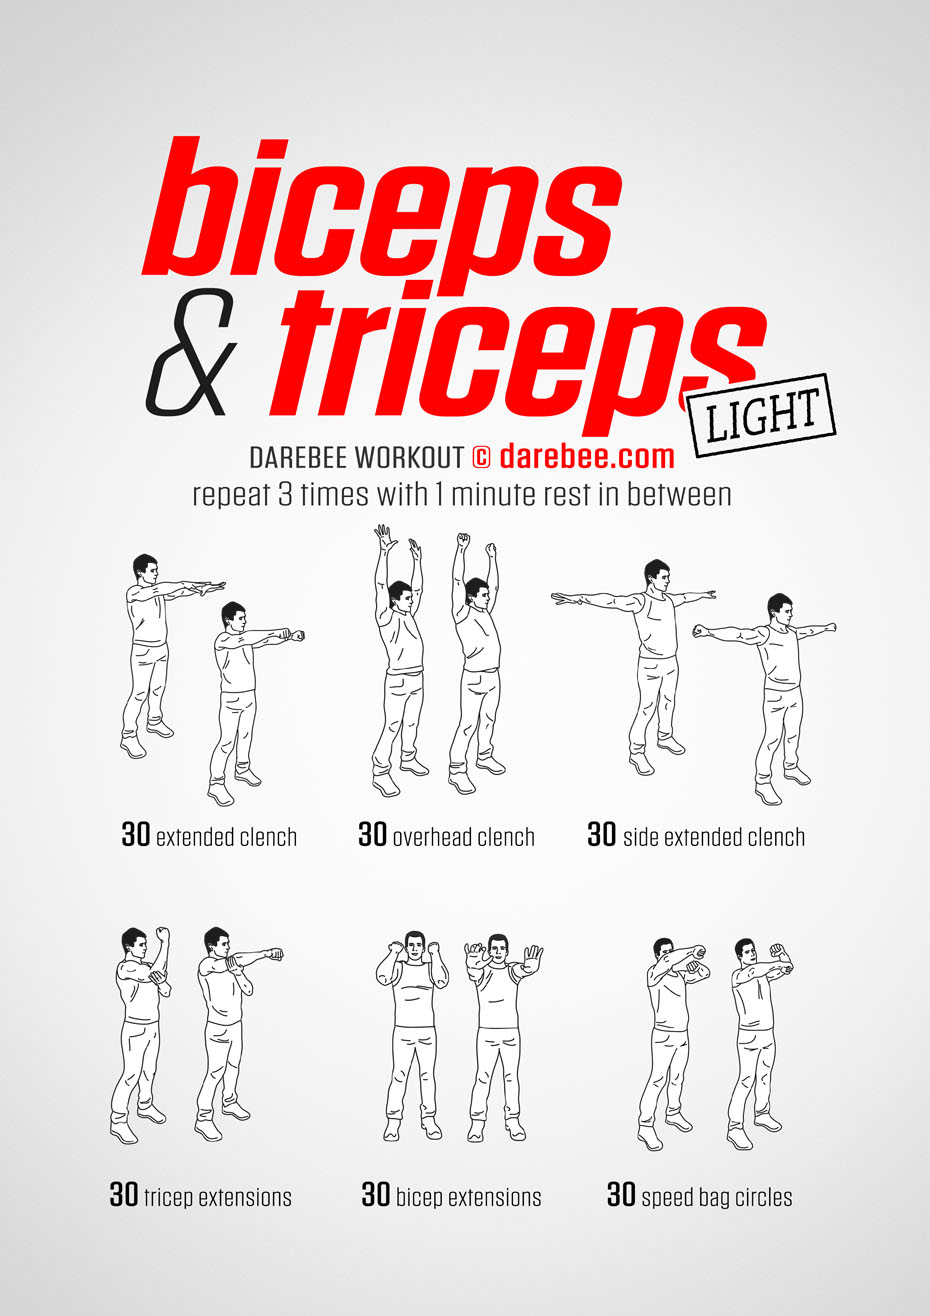 https://darebee.com/images/workouts/bicep-and-triceps-light-workout.jpg